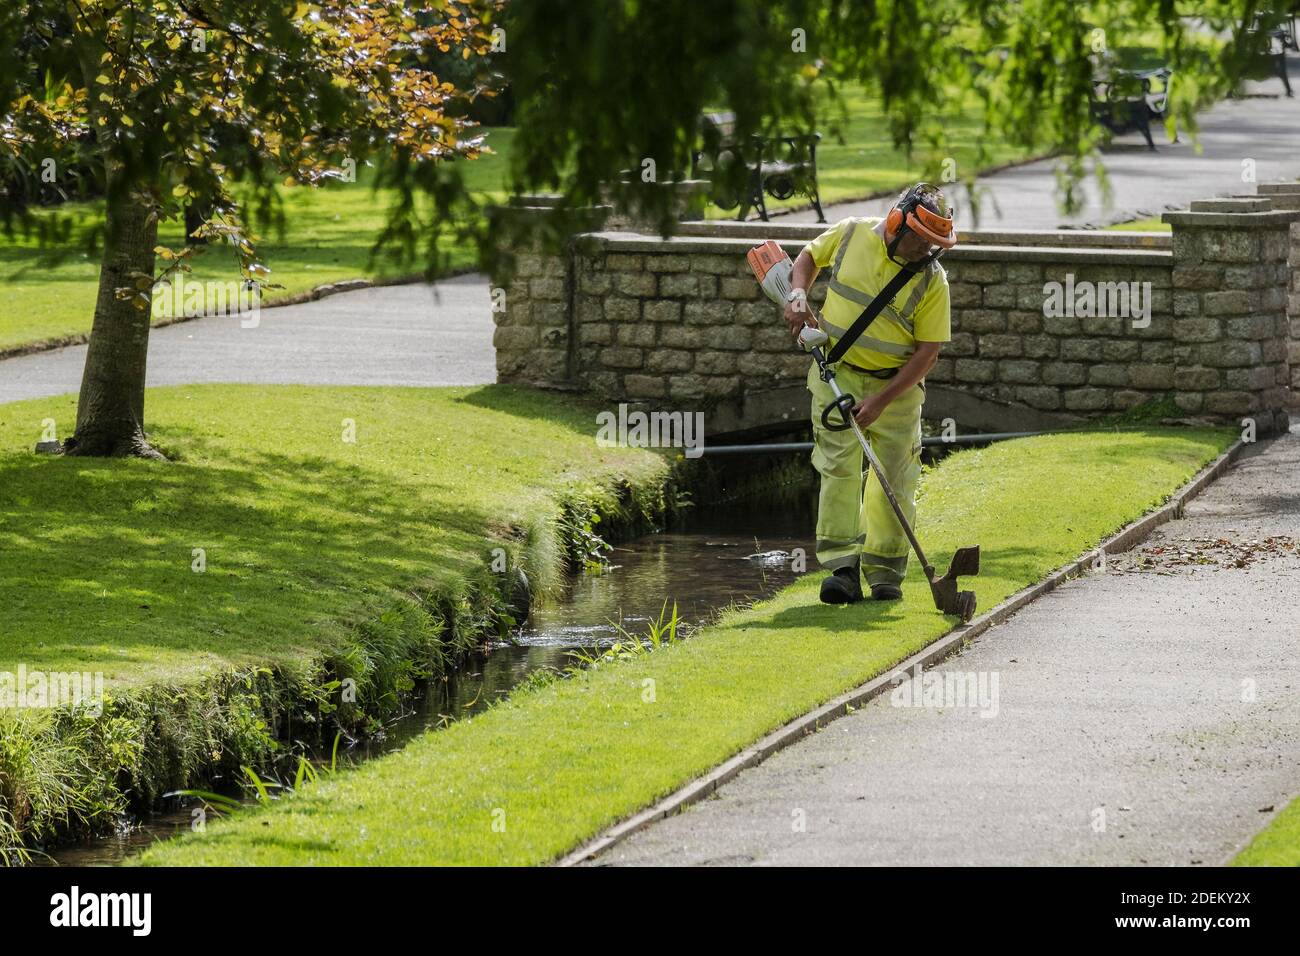 A Cormac worker strimming grass in Trenance gardens in Newquay in Cornwall. Stock Photo